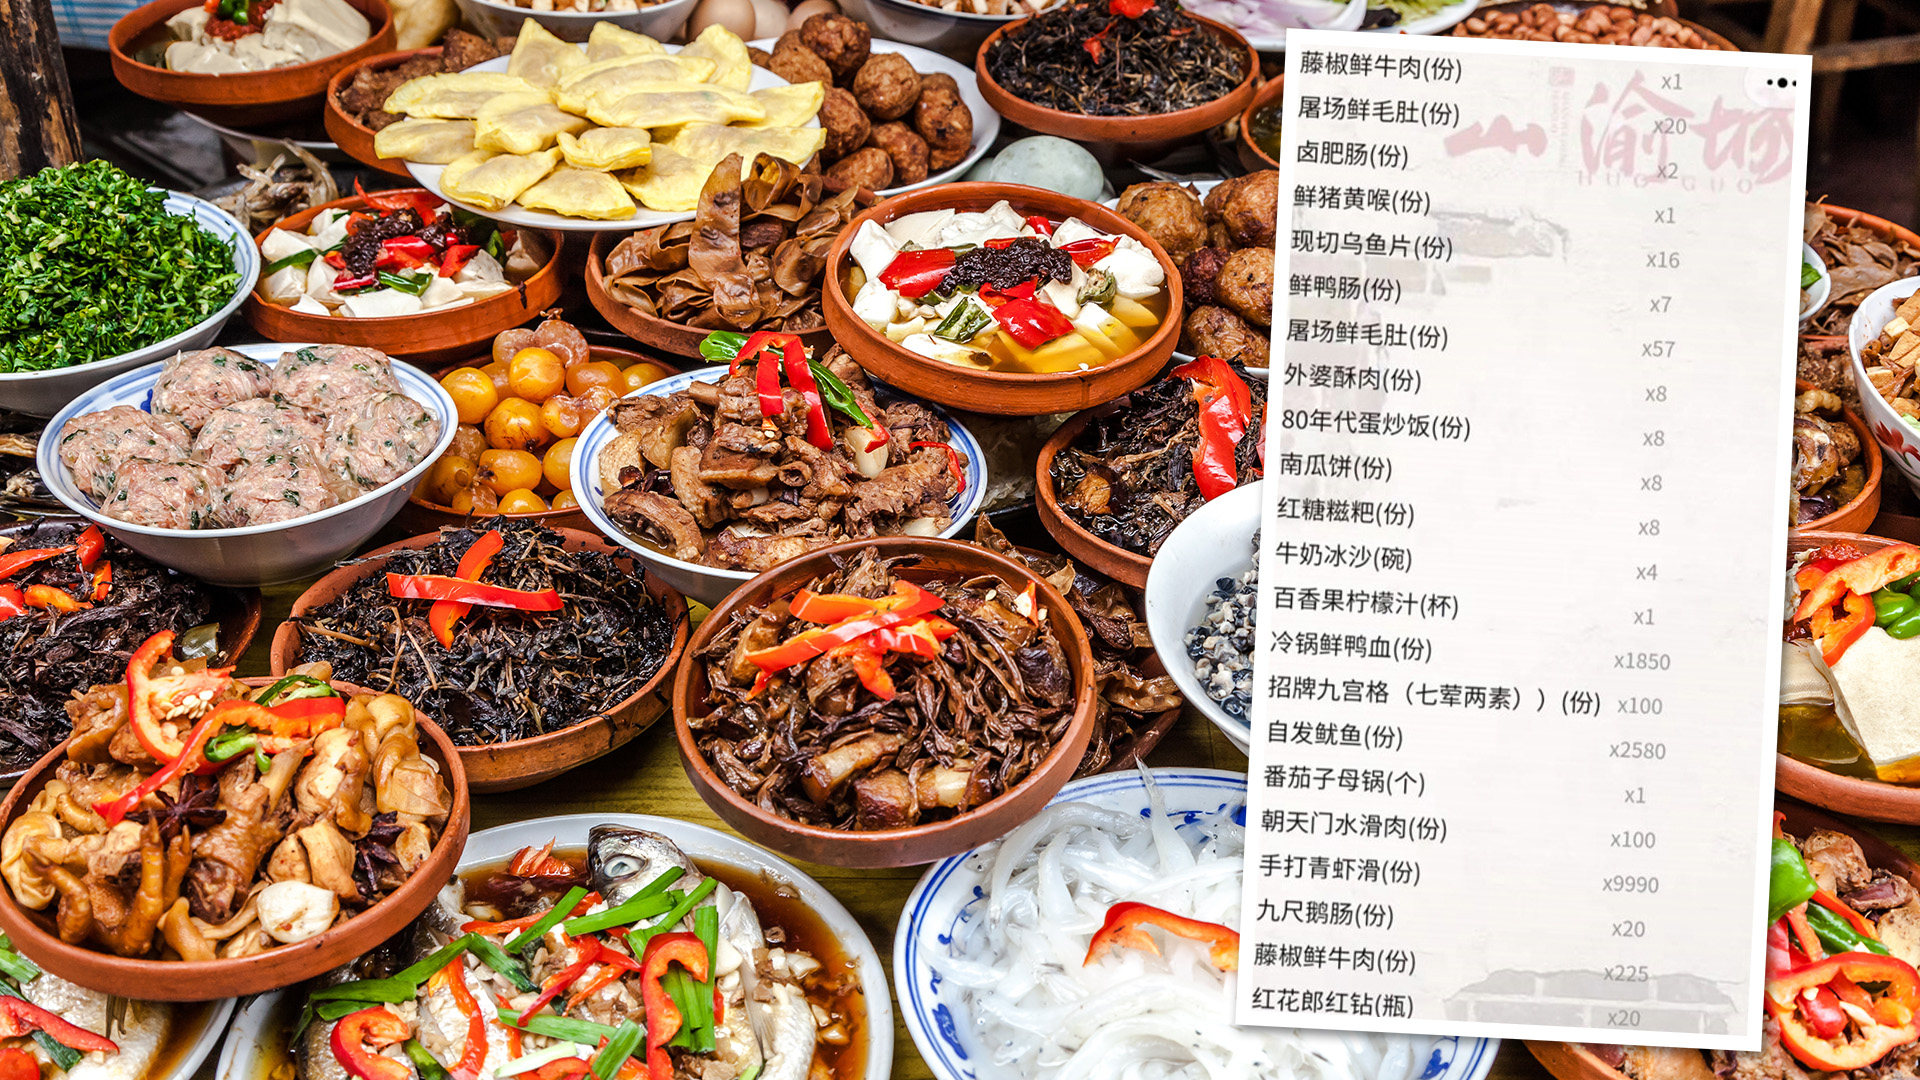 A diner in China was presented with a meal bill for US$60,000 after she accidentally posted photos of the eatery’s food ordering QR code online.
Photo: SCMP composite/Shutterstock/The Paper
